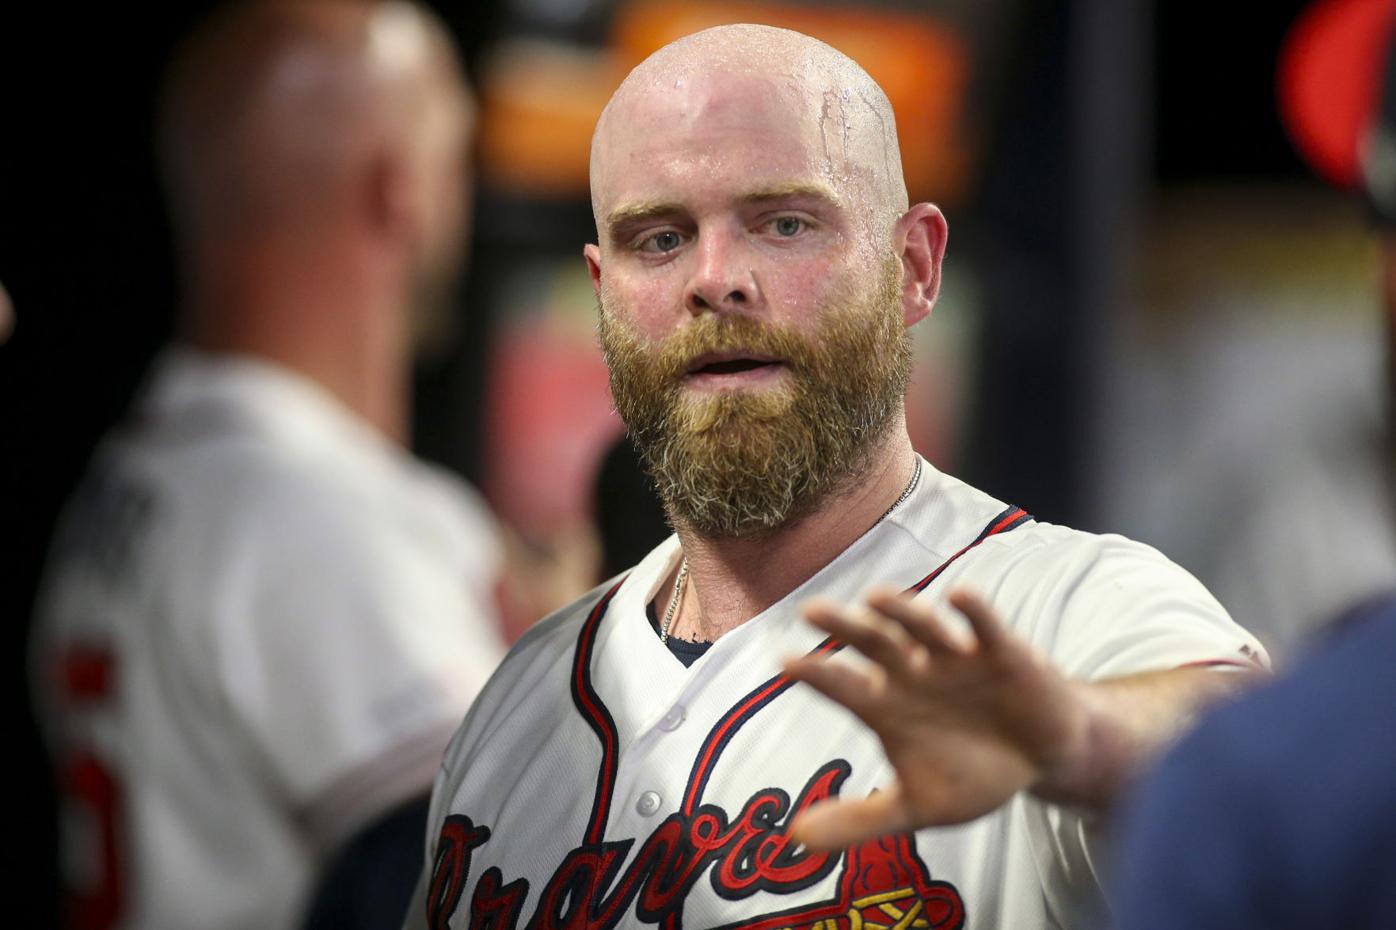 Atlanta Braves Catcher Brian McCann looks on during the game between